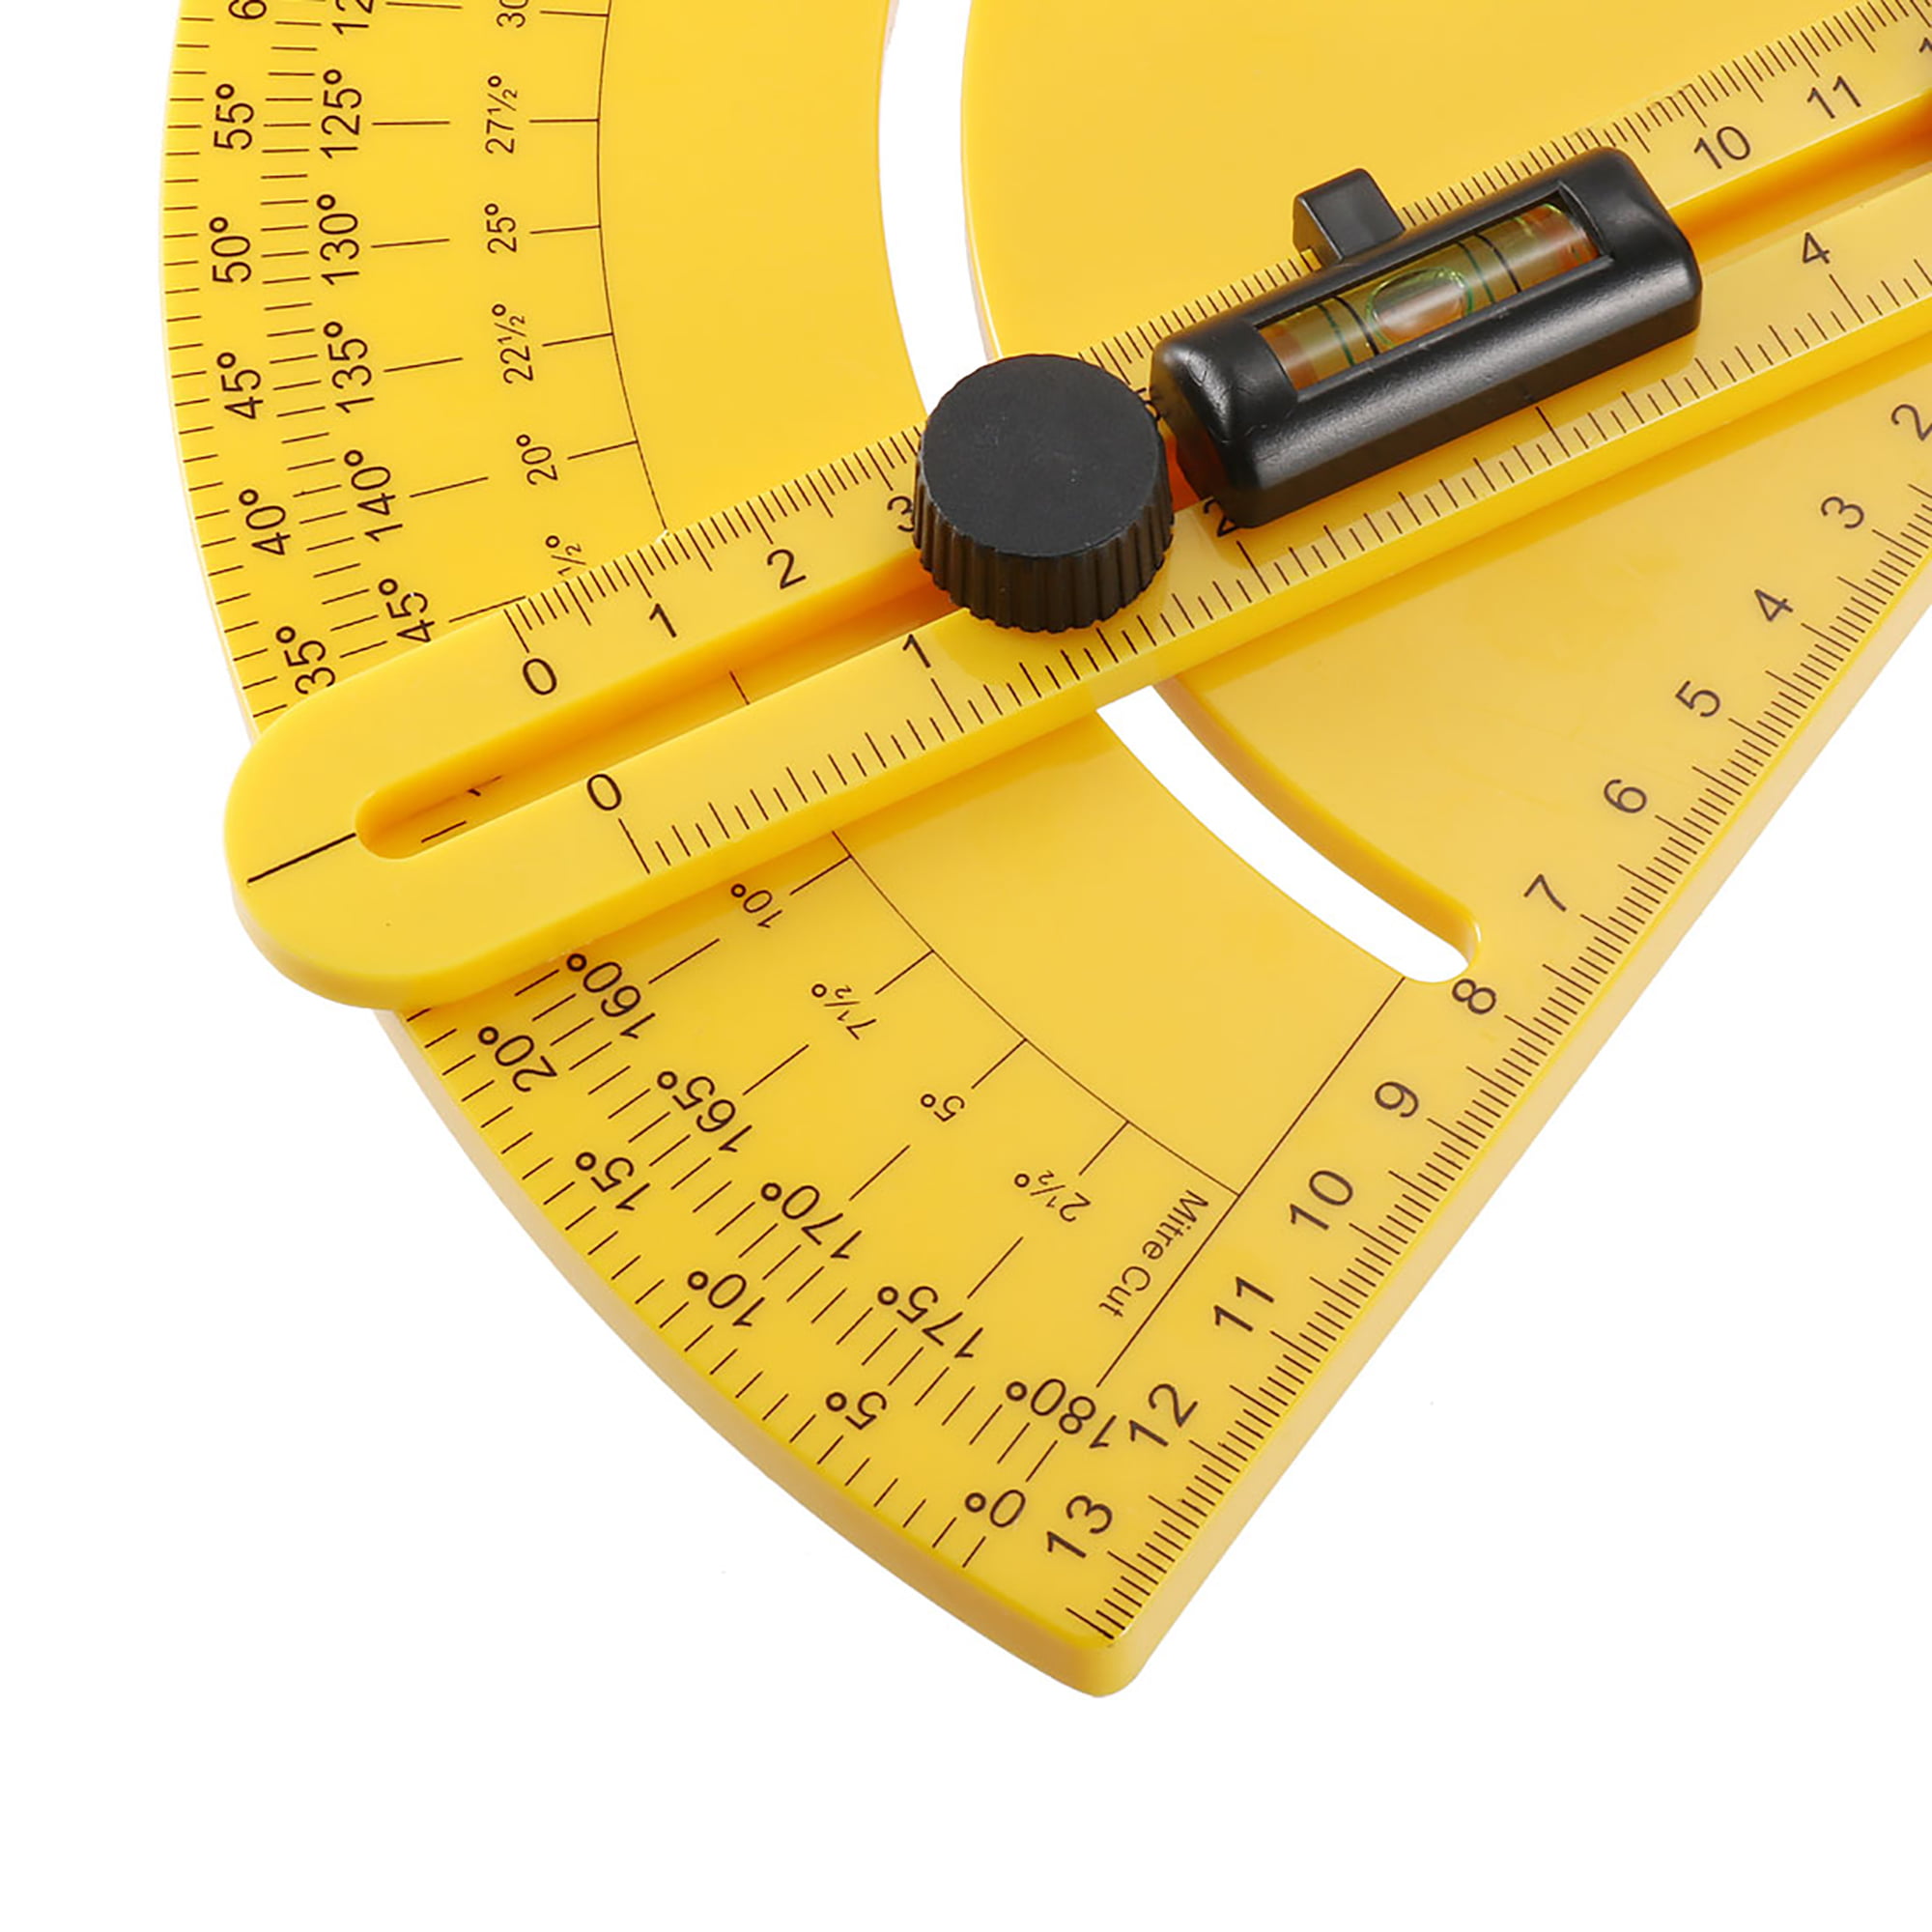 Protractor Angle Finder 0-180° Round Head with 250mm 10inch Arm Measuring Ruler 